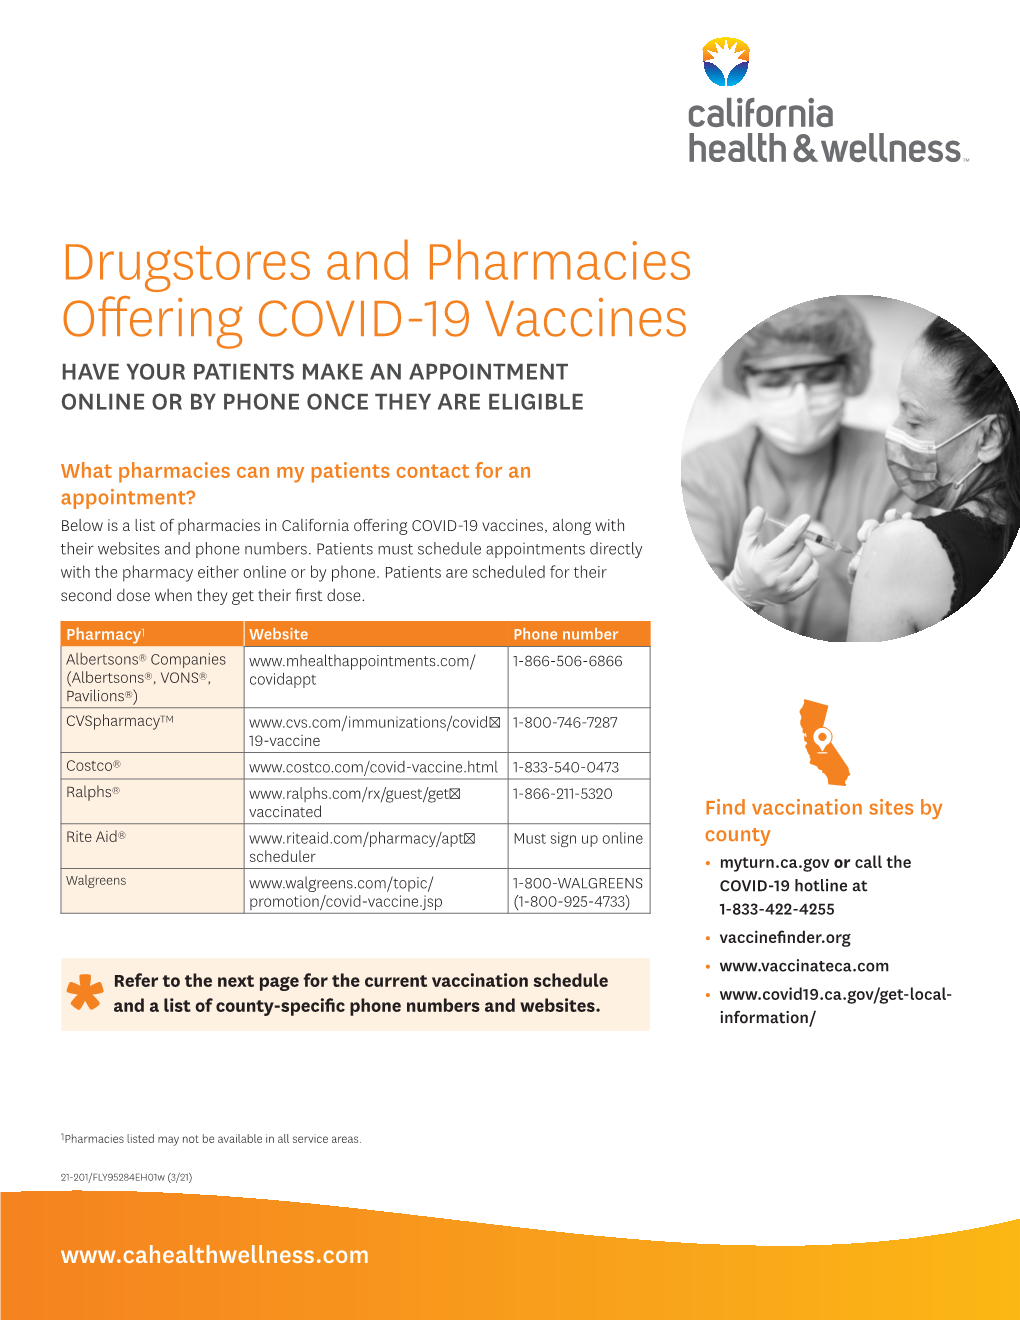 Drugstores and Pharmacies Offering COVID-19 Vaccines HAVE YOUR PATIENTS MAKE an APPOINTMENT ONLINE OR by PHONE ONCE THEY ARE ELIGIBLE